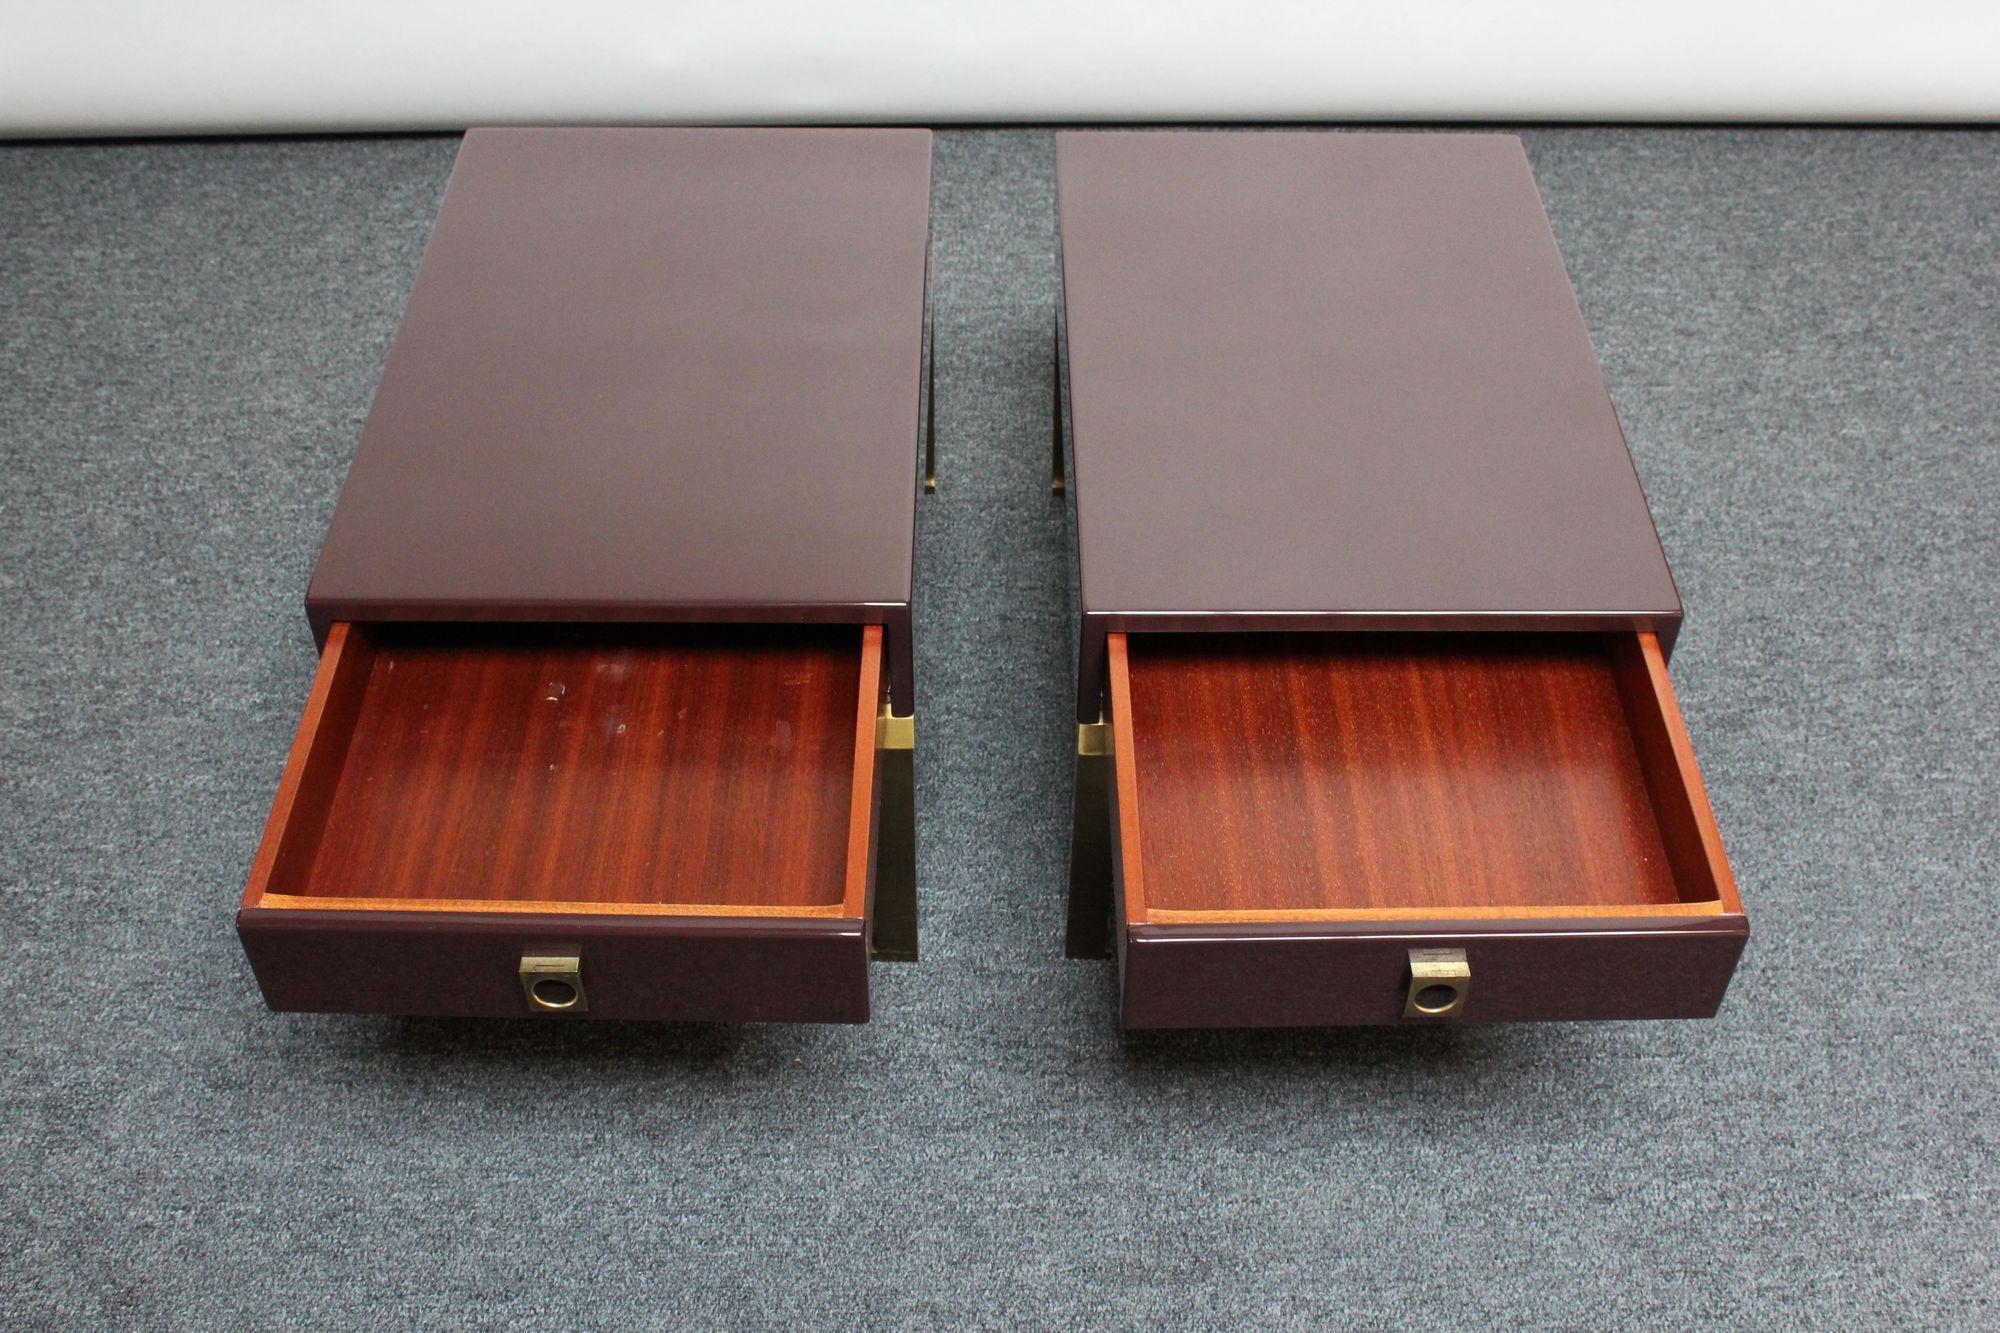 Pair of French Moderne Lacquered Mahogany and Brass Nightstands by Guy Lefèvre In Good Condition For Sale In Brooklyn, NY